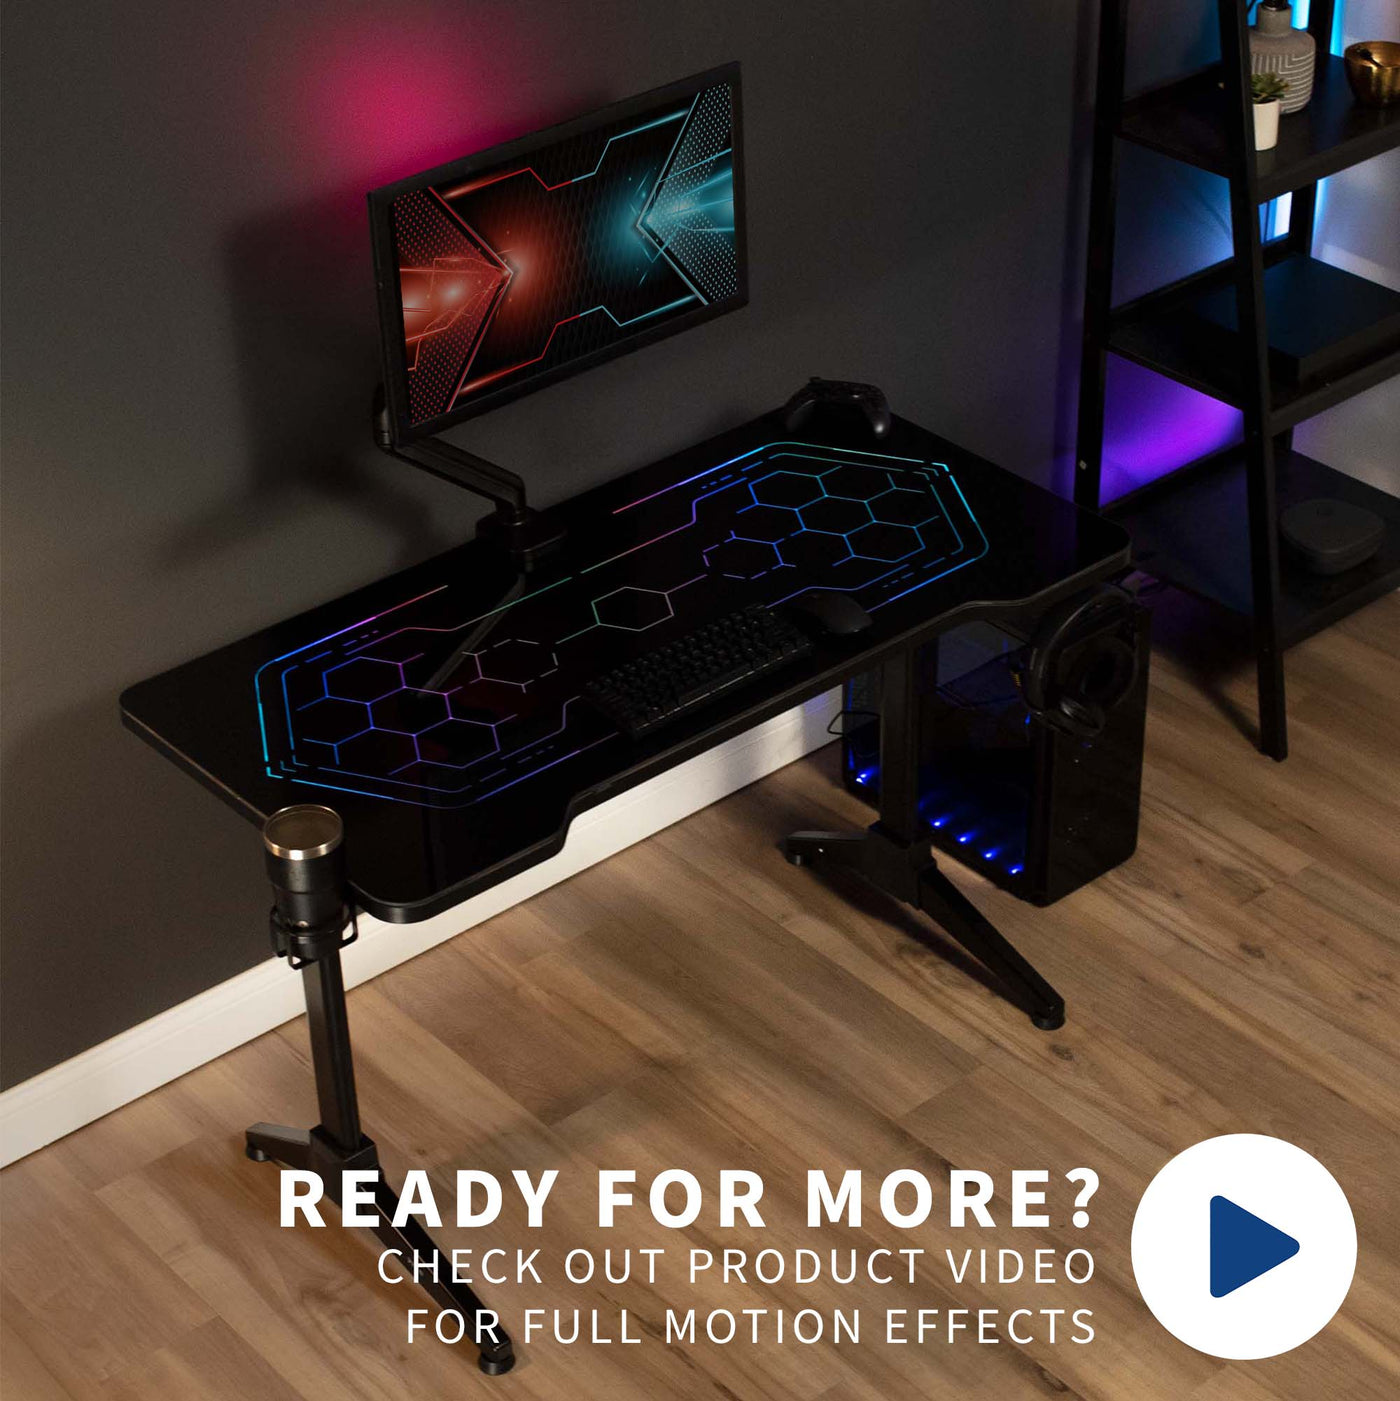 Sturdy RGB lighting gaming desk with color changing remote controlled LED lights under tempered glass tabletop surface.